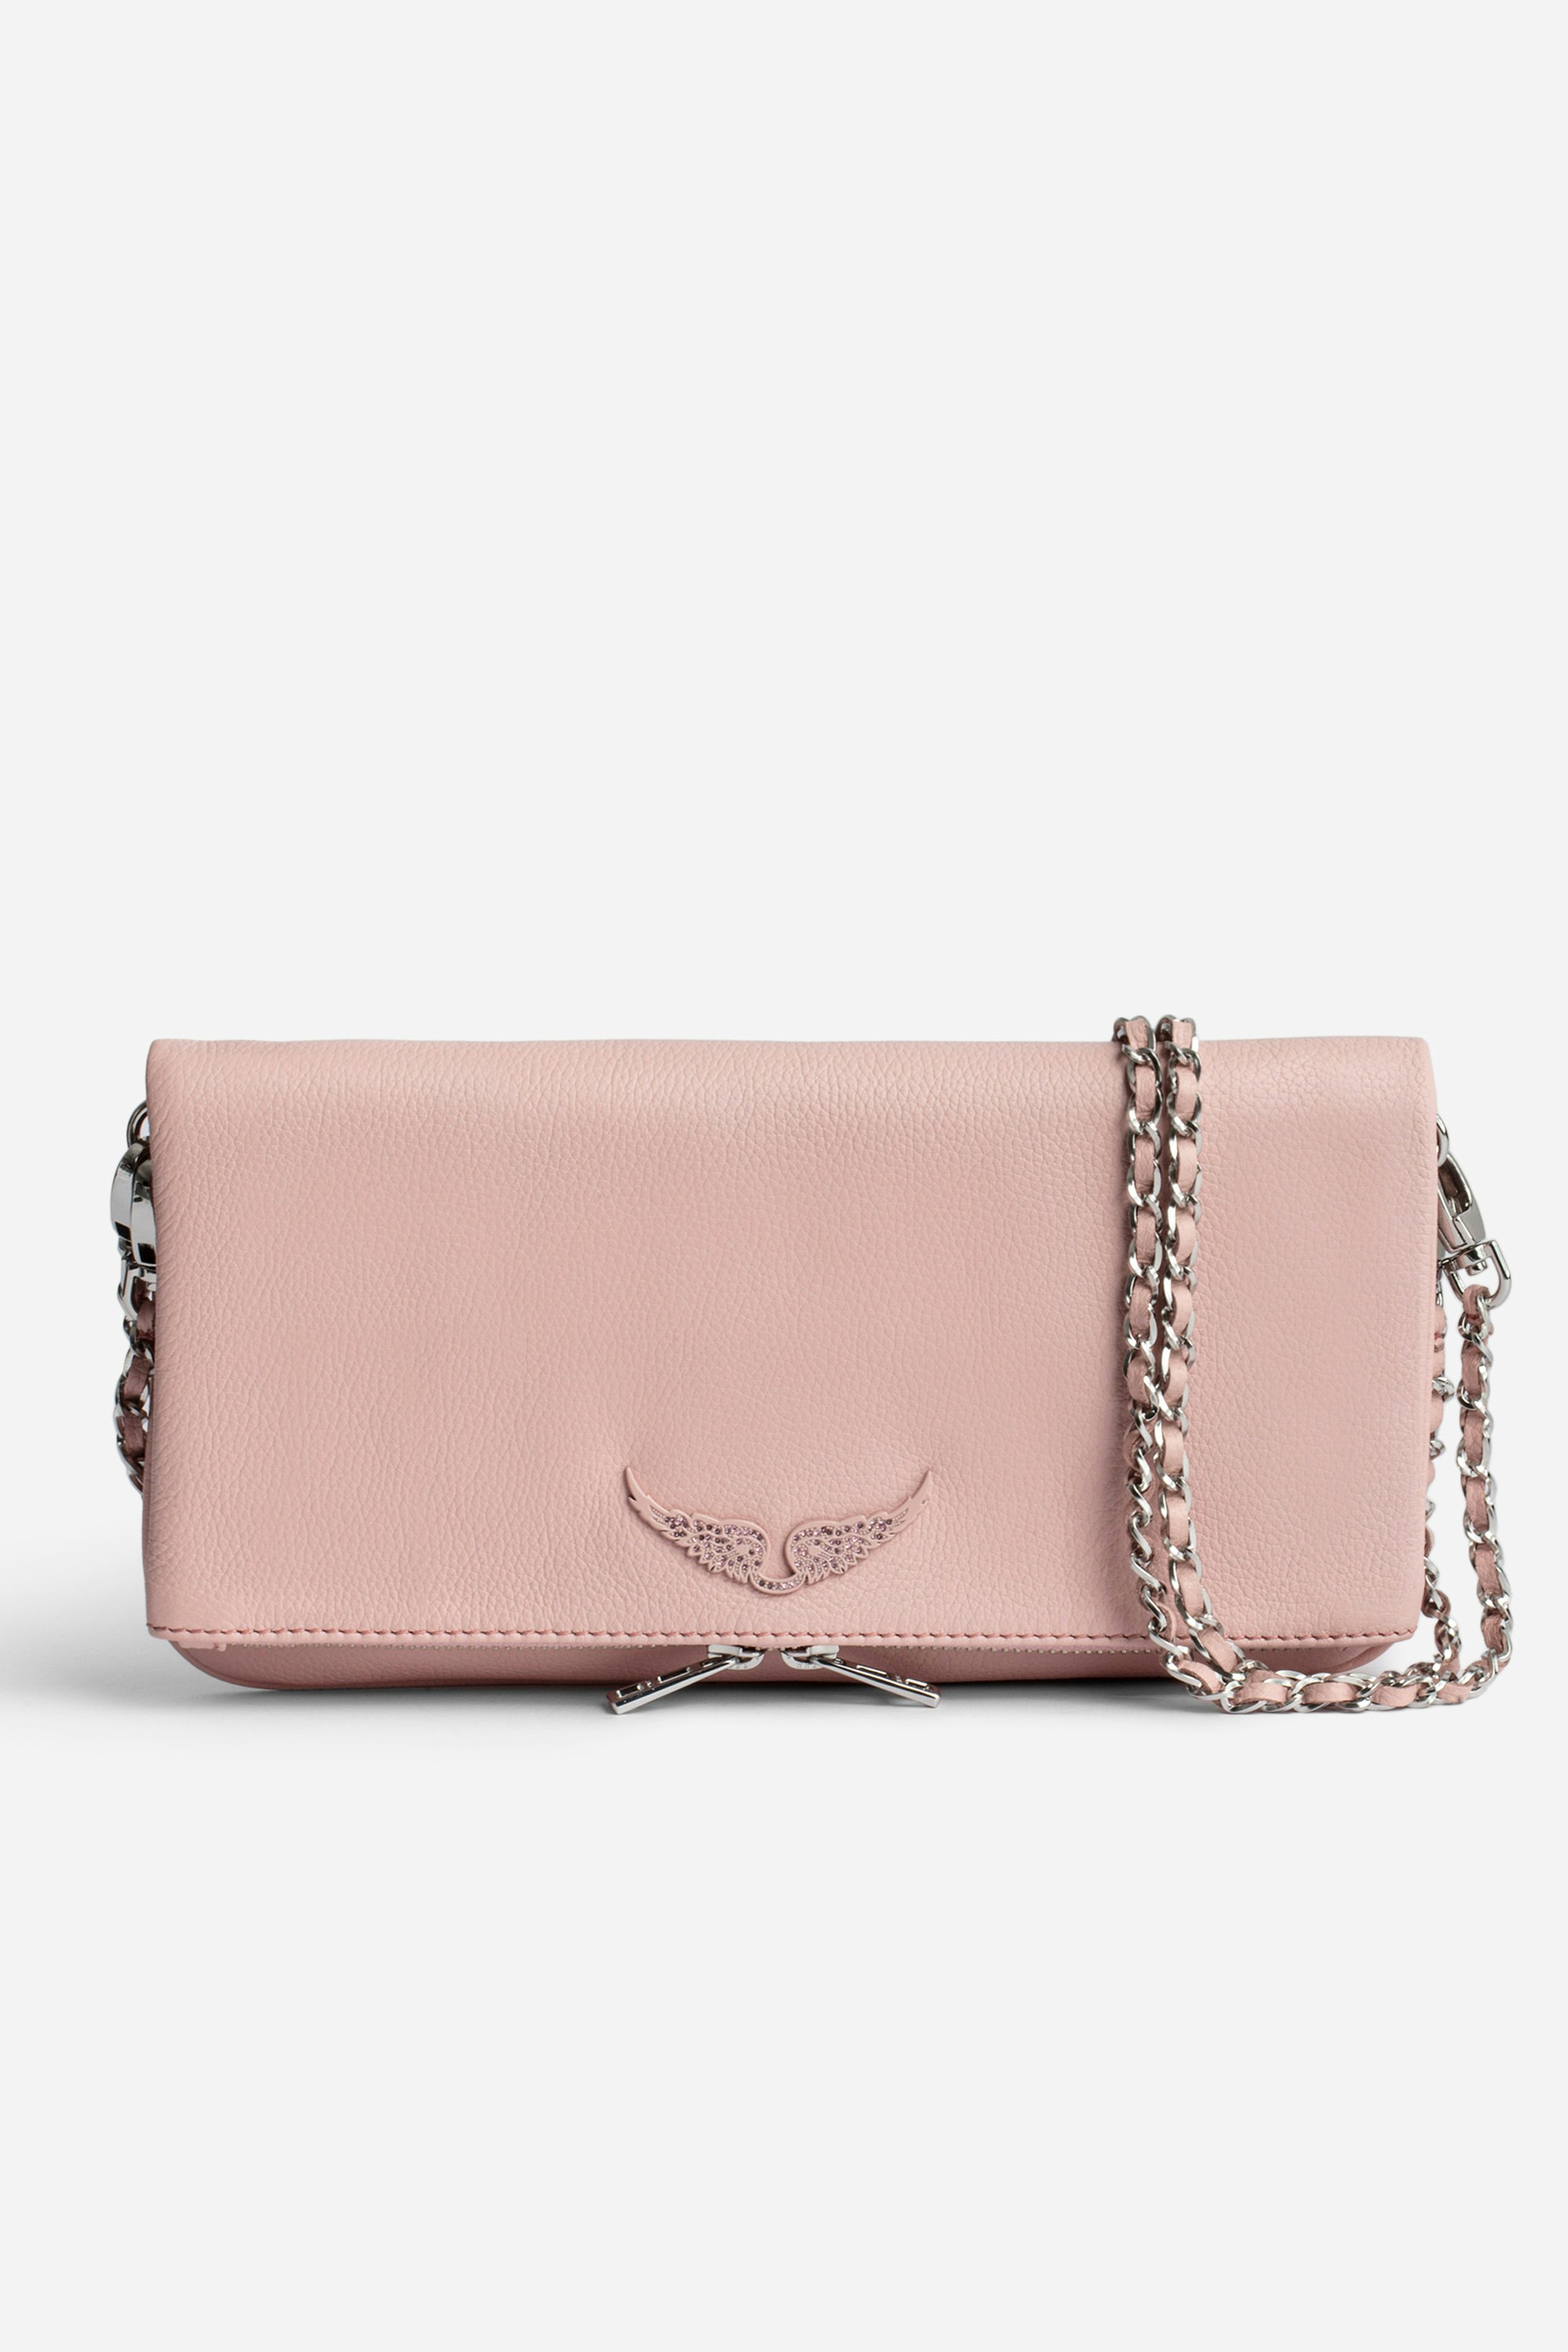 Rock Clutch Women’s light pink grained leather clutch bag with double leather and metal chain strap.